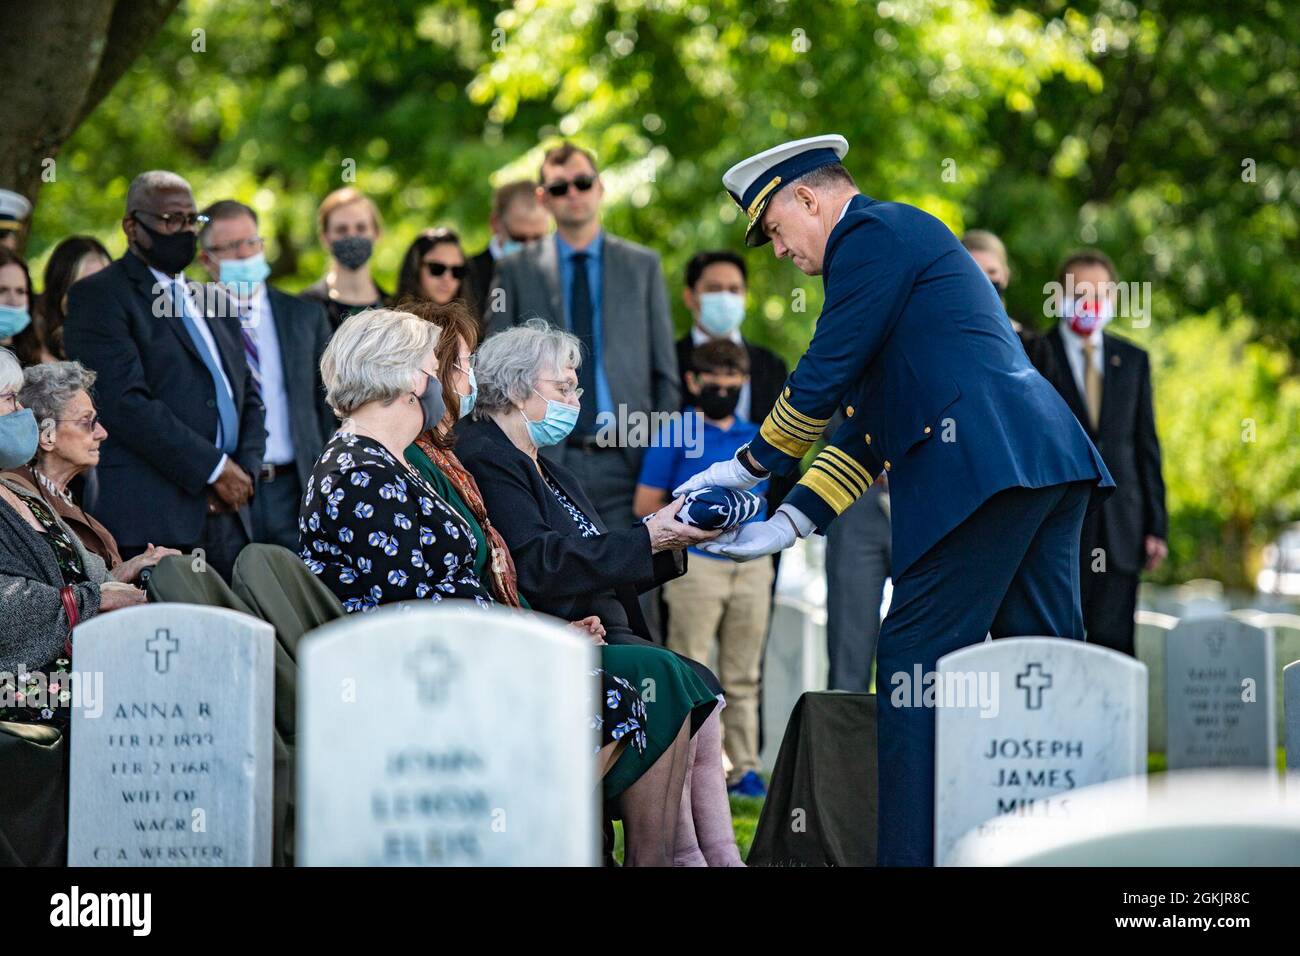 The 26th Commandant of the U.S. Coast Guard Adm. Karl Schultz presents the U.S. flag to Melinda Gilbert during the funeral service of Gilbert's husband, U.S. Coast Guard Rear Adm. Marshall E. Gilbert, in Section 33 of Arlington National Cemetery, Arlington, Virginia, May 6, 2021.     Rear Adm. Gilbert was a distinguished leader in the U.S. Coast Guard and helped create the technical standards for electronic communications, navigation, and distress alerting used worldwide.     Read more about Rear Adm. Gilbert’s service here: https://www.history.uscg.mil/Browse-by-Topic/Notable-People/All/Artic Stock Photo